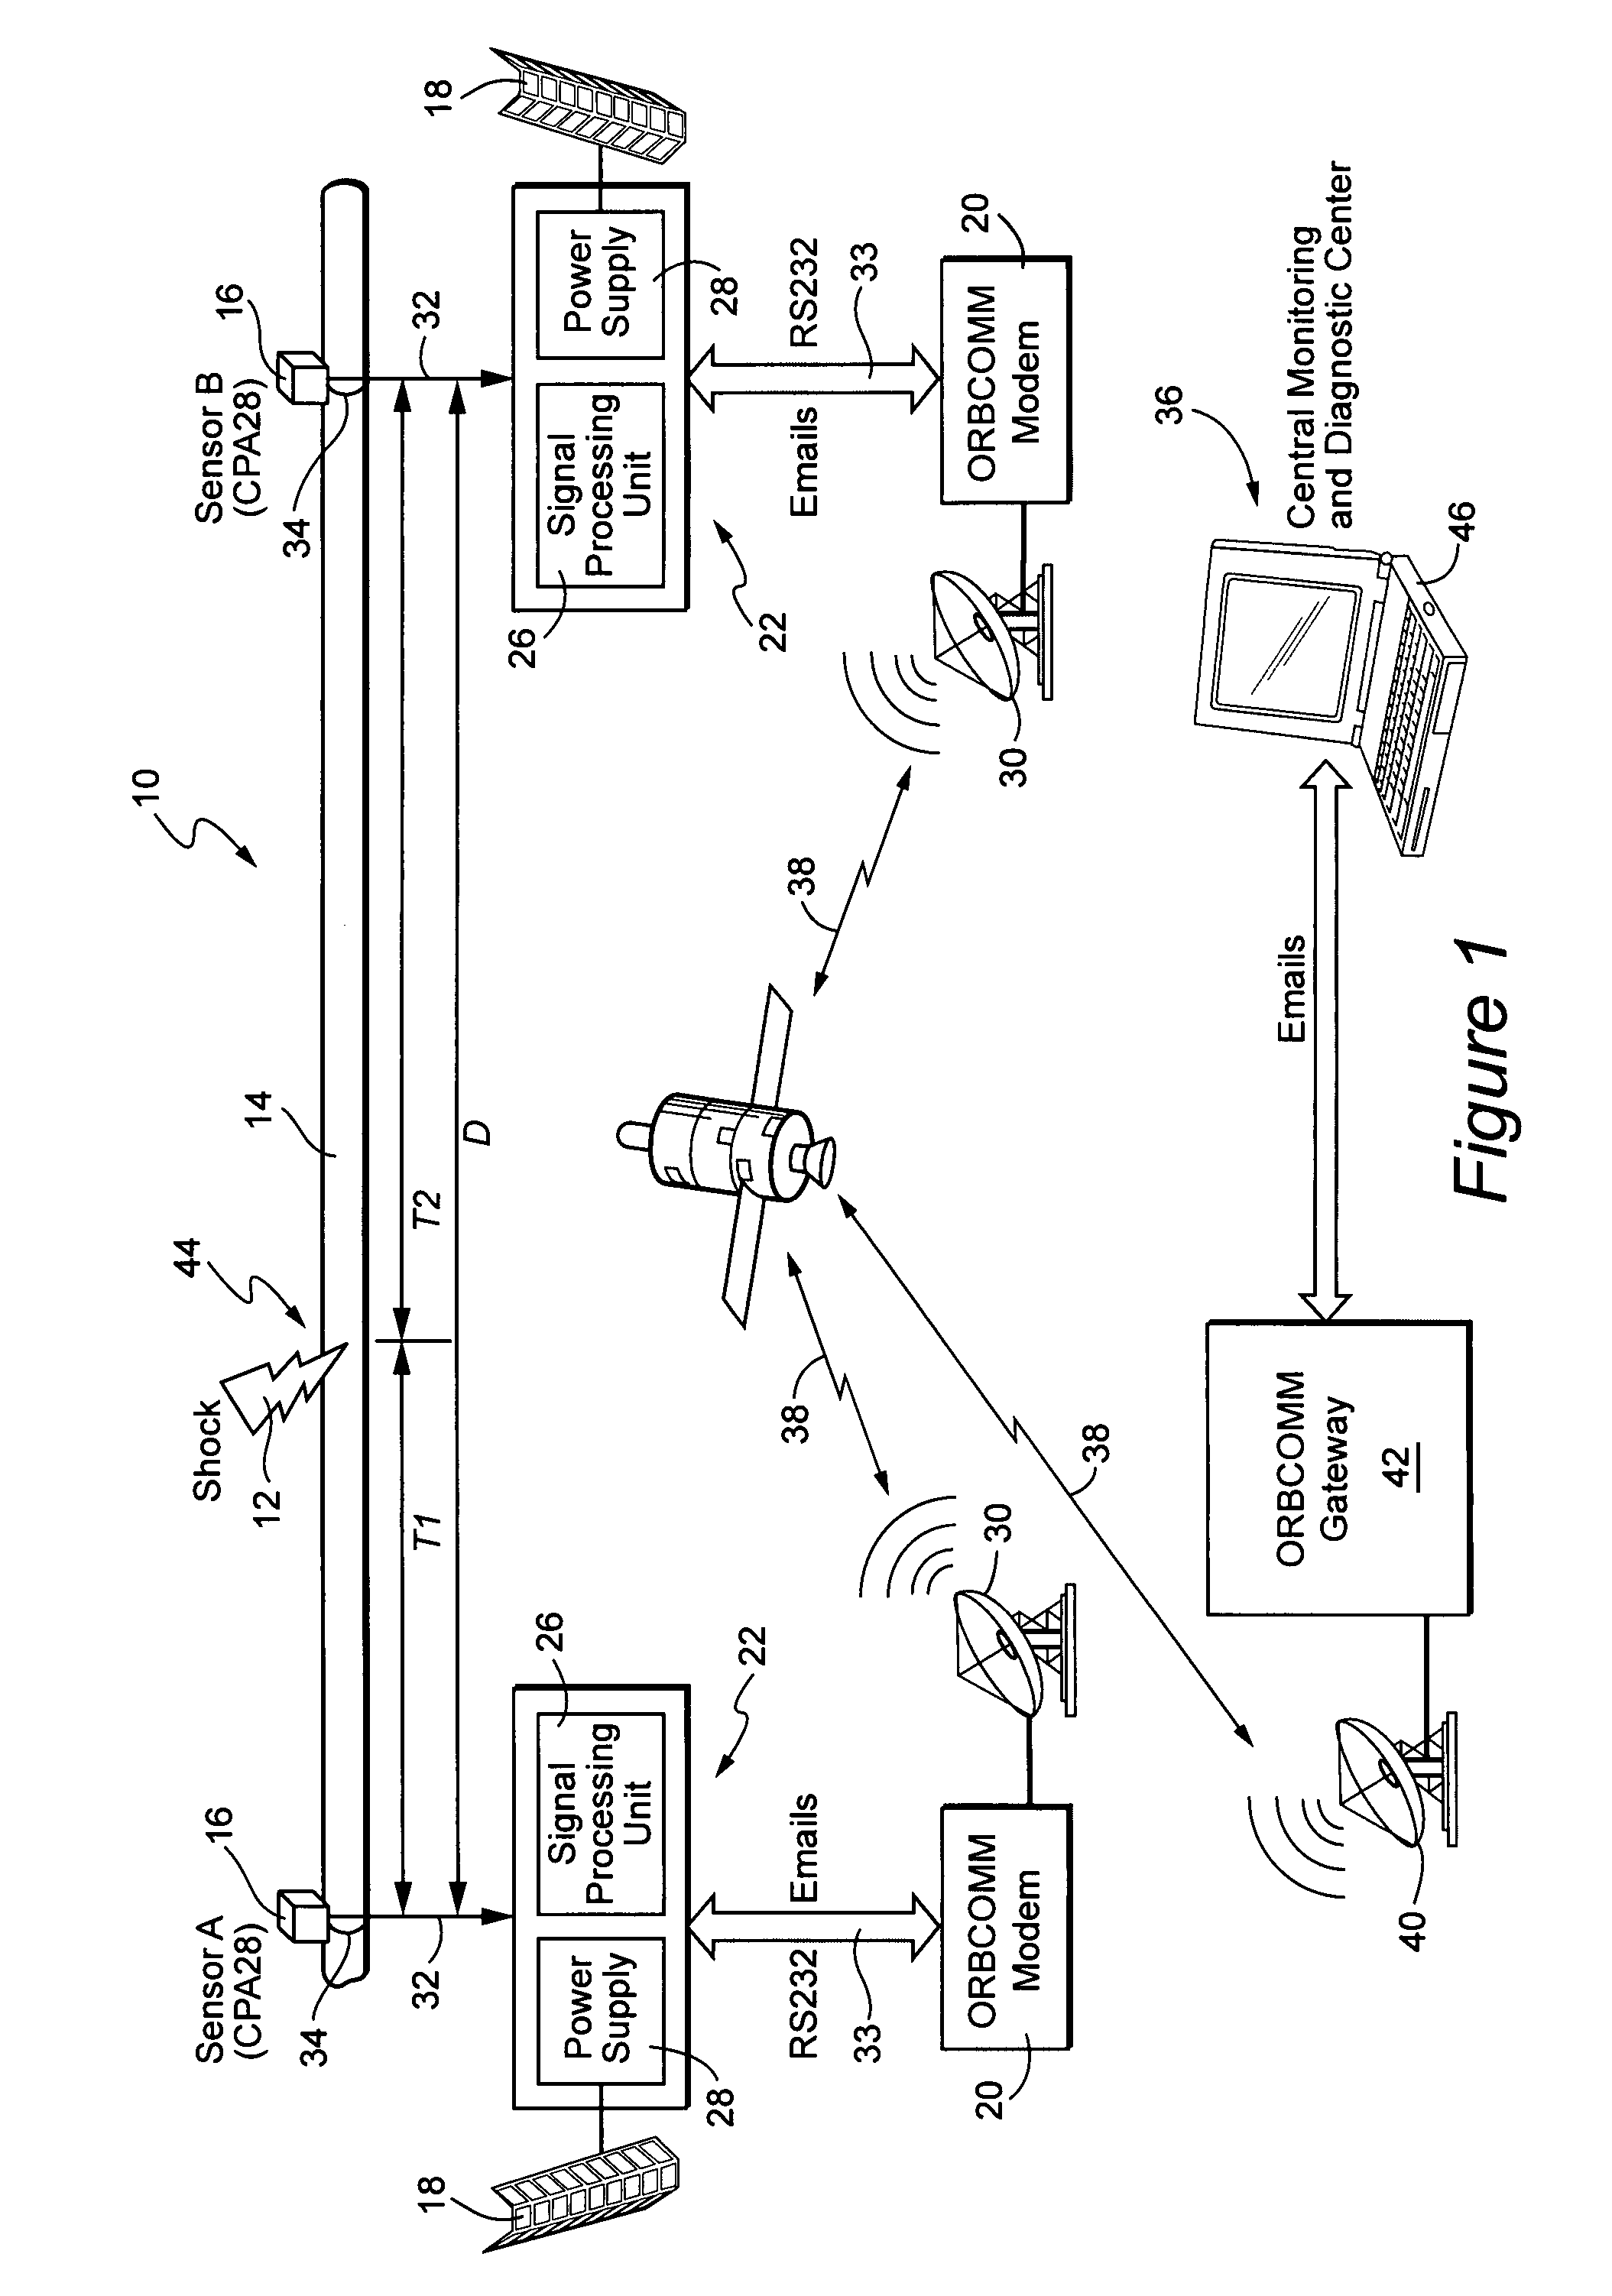 Acoustic impact detection and monitoring system